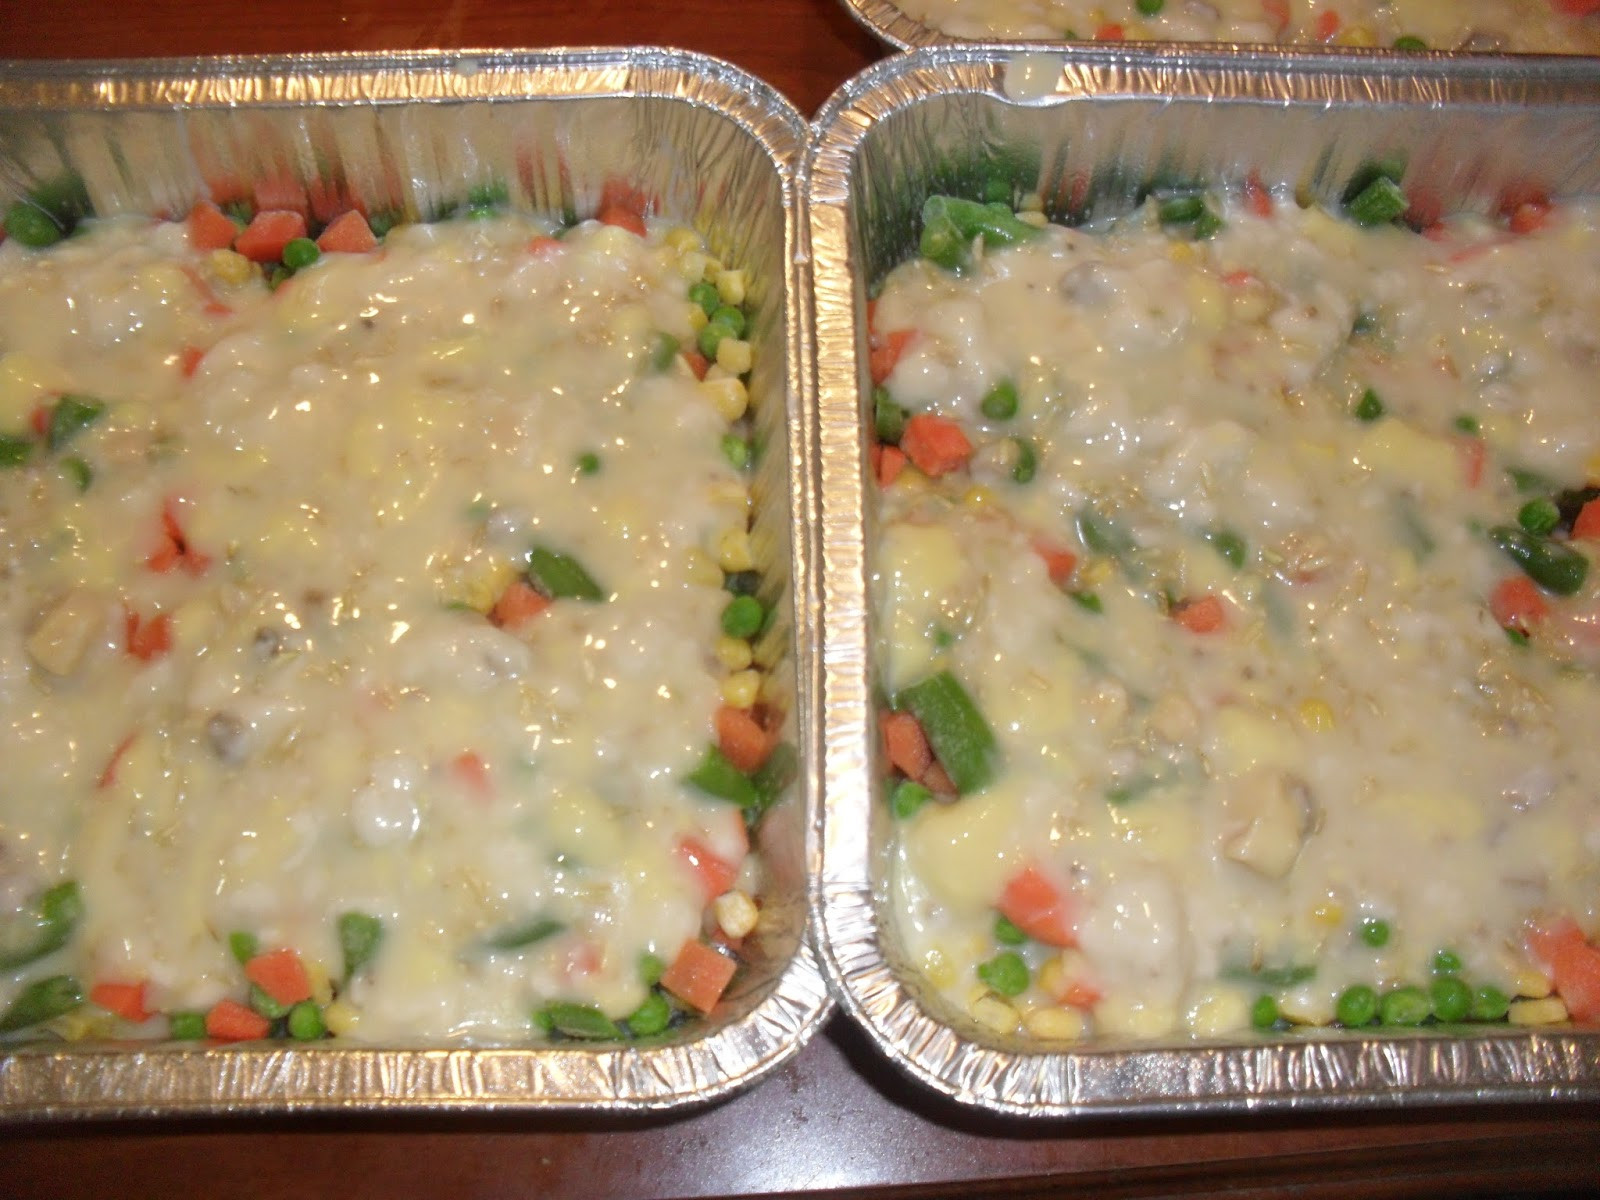 Mixed Vegetable Casserole With Cream Of Mushroom Soup
 mixed ve able casserole with cream of mushroom soup